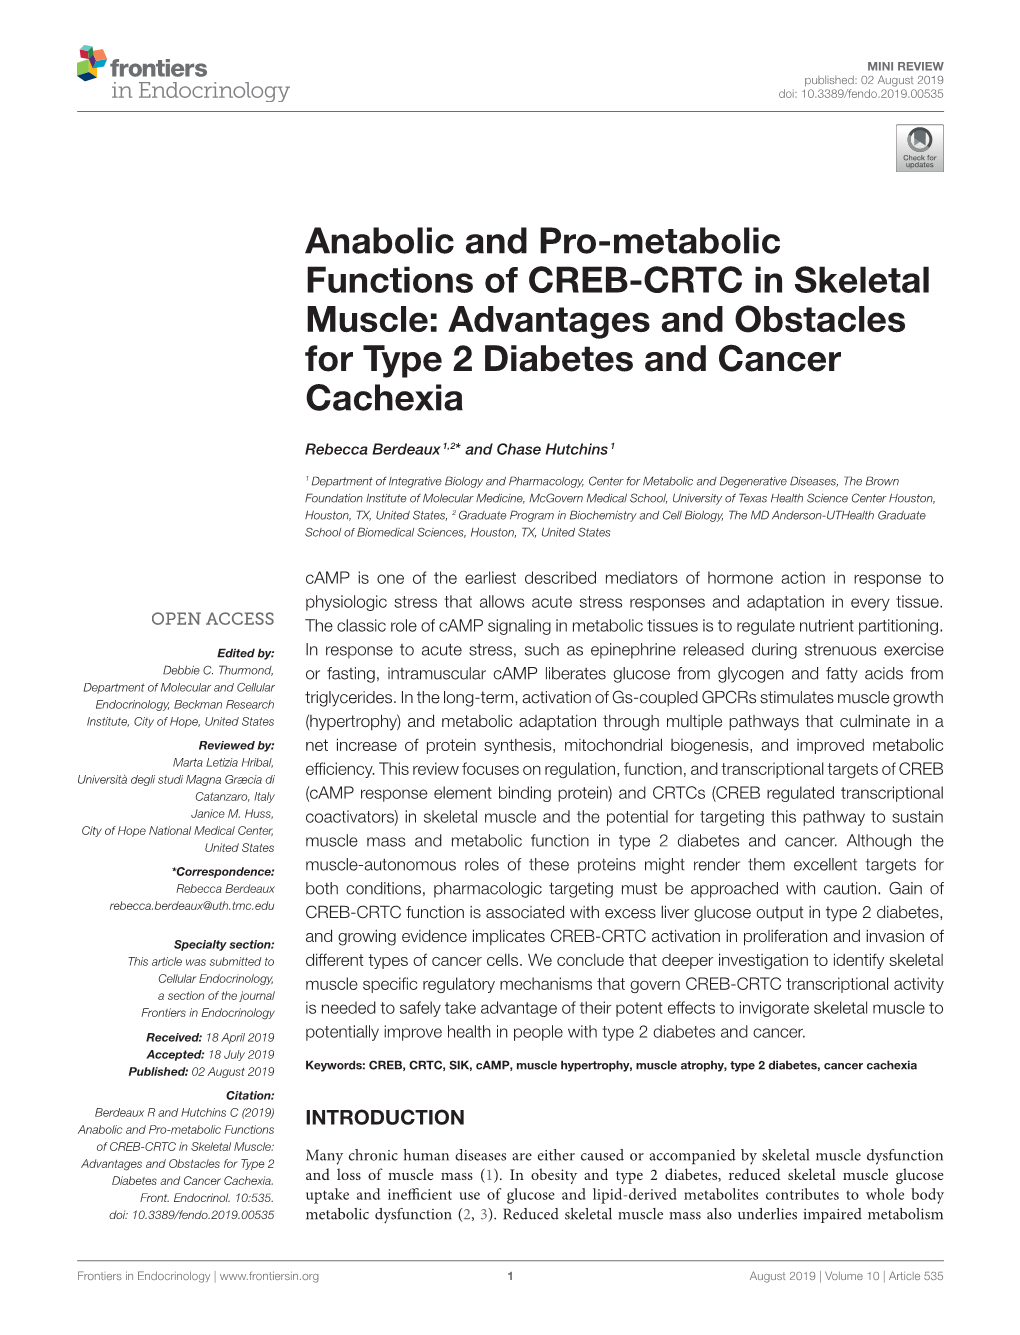 Anabolic and Pro-Metabolic Functions of CREB-CRTC in Skeletal Muscle: Advantages and Obstacles for Type 2 Diabetes and Cancer Cachexia